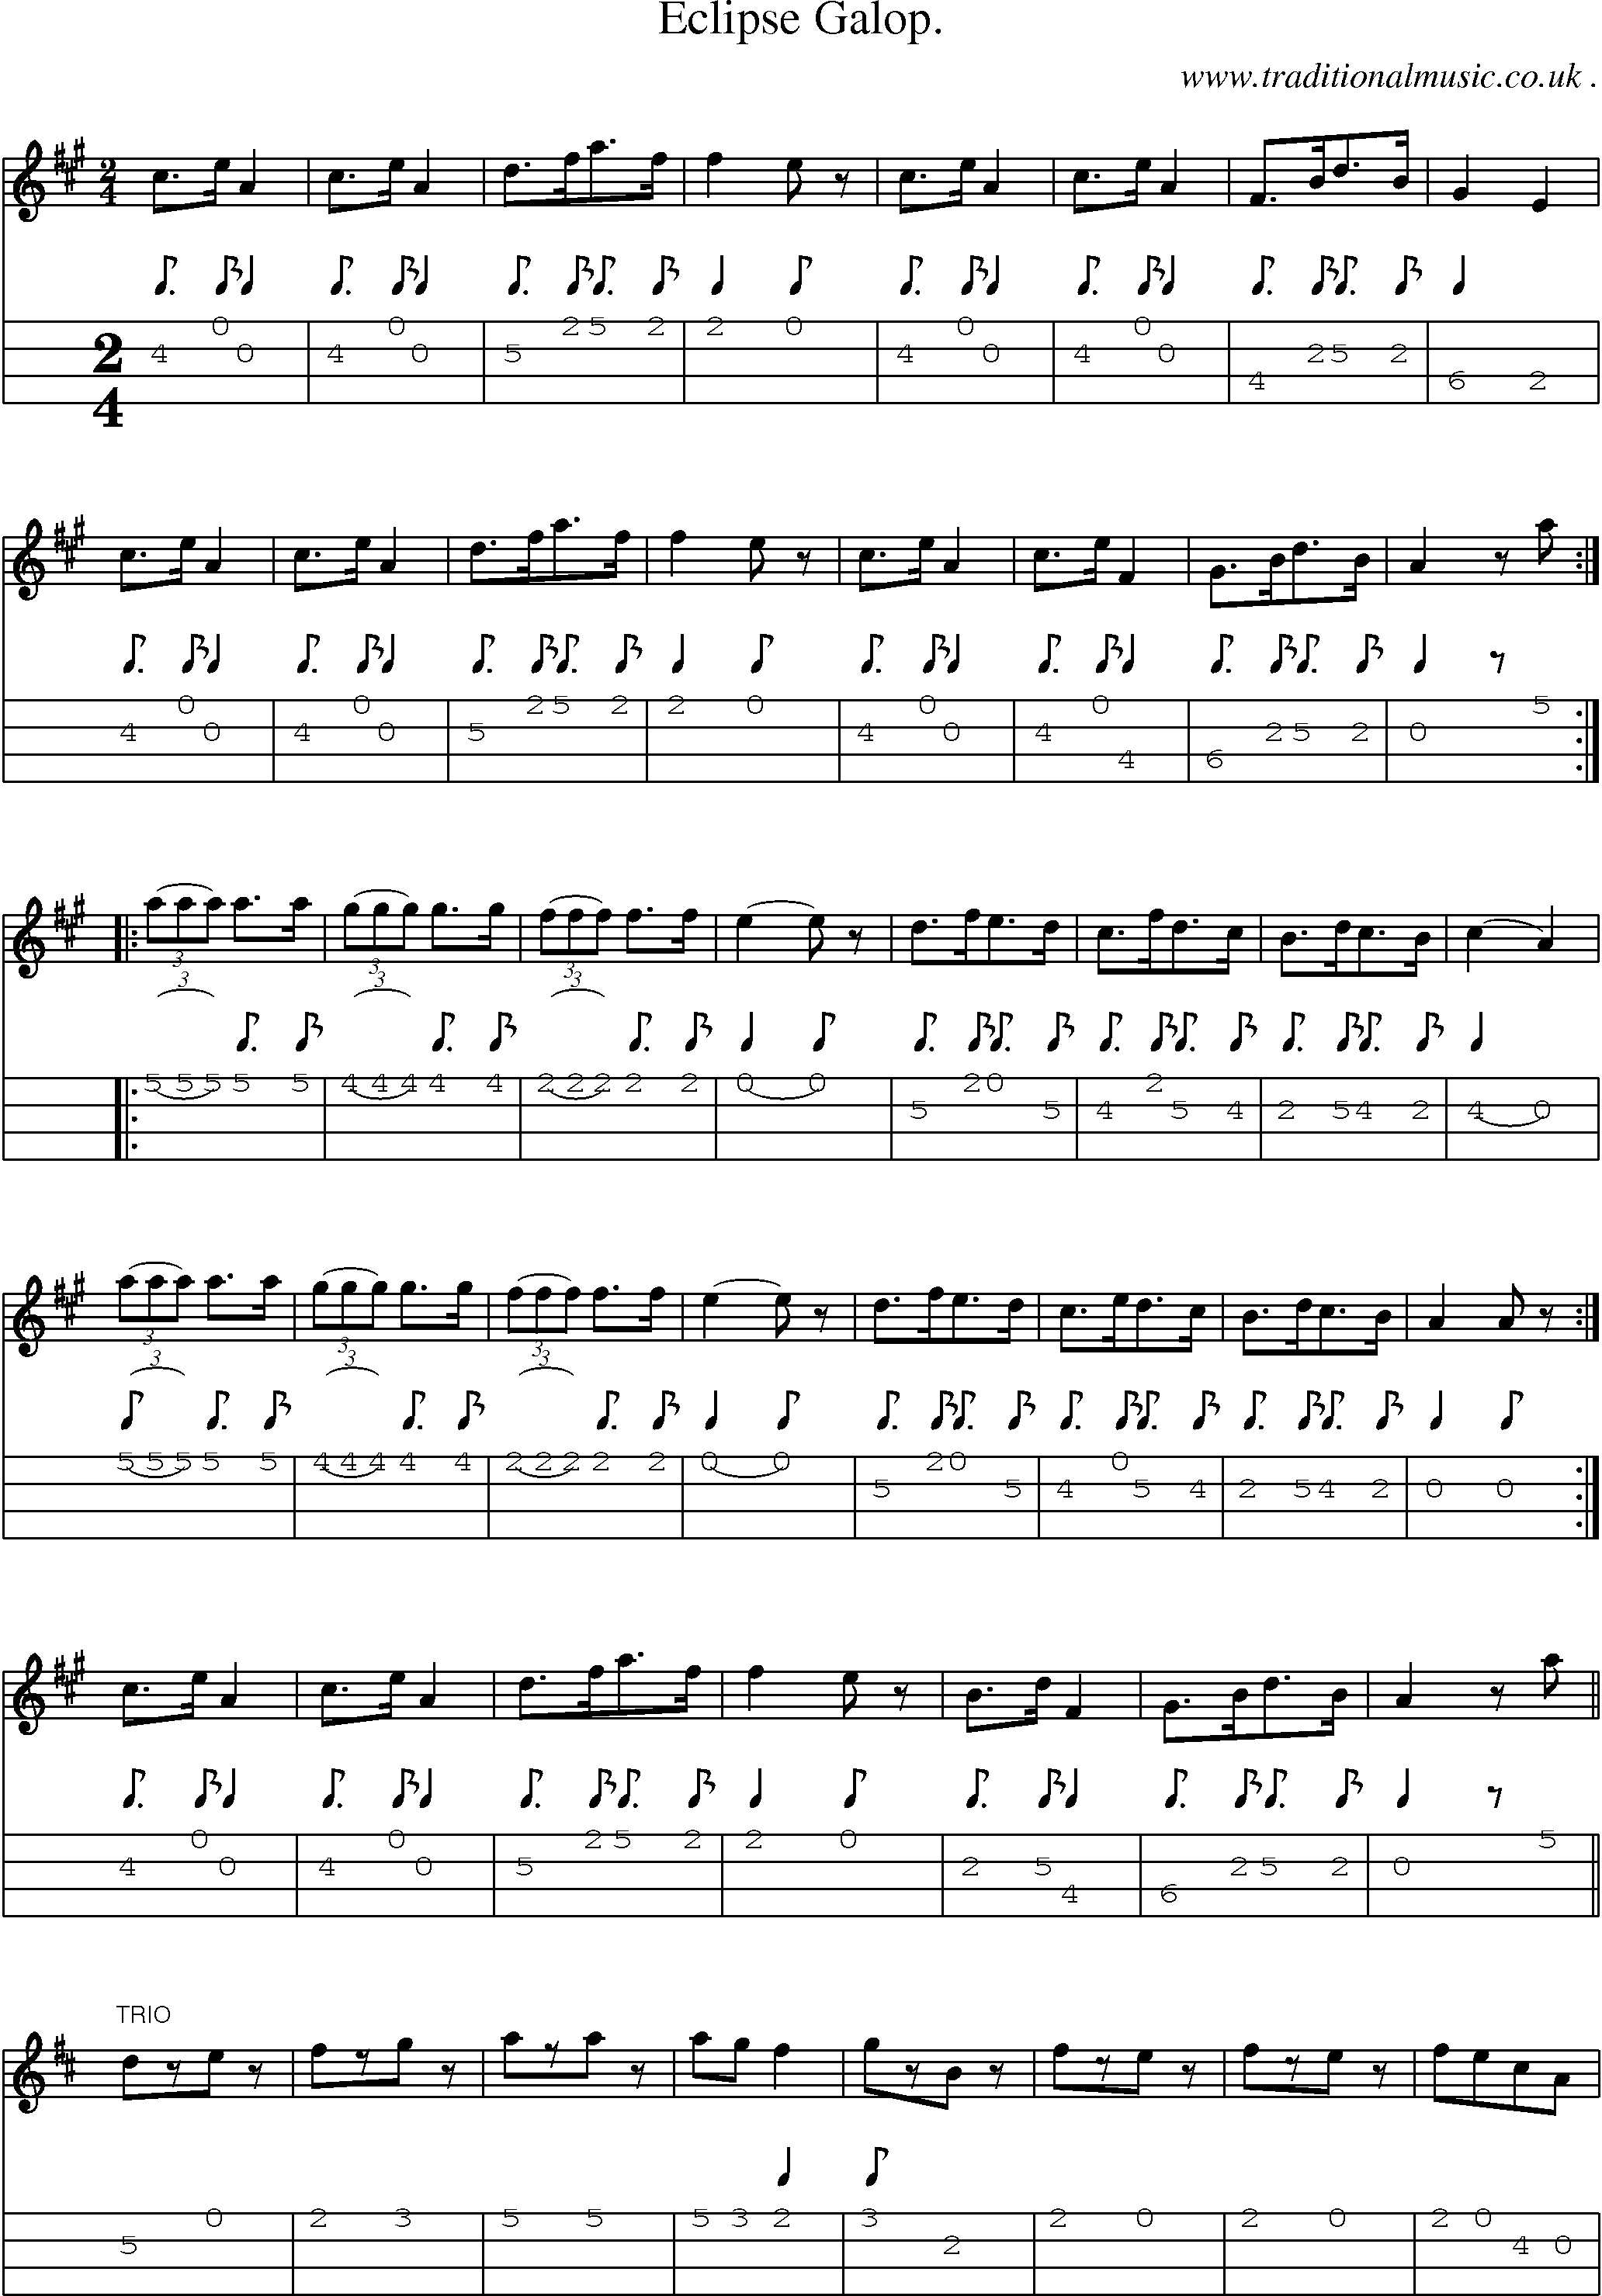 Sheet-Music and Mandolin Tabs for Eclipse Galop